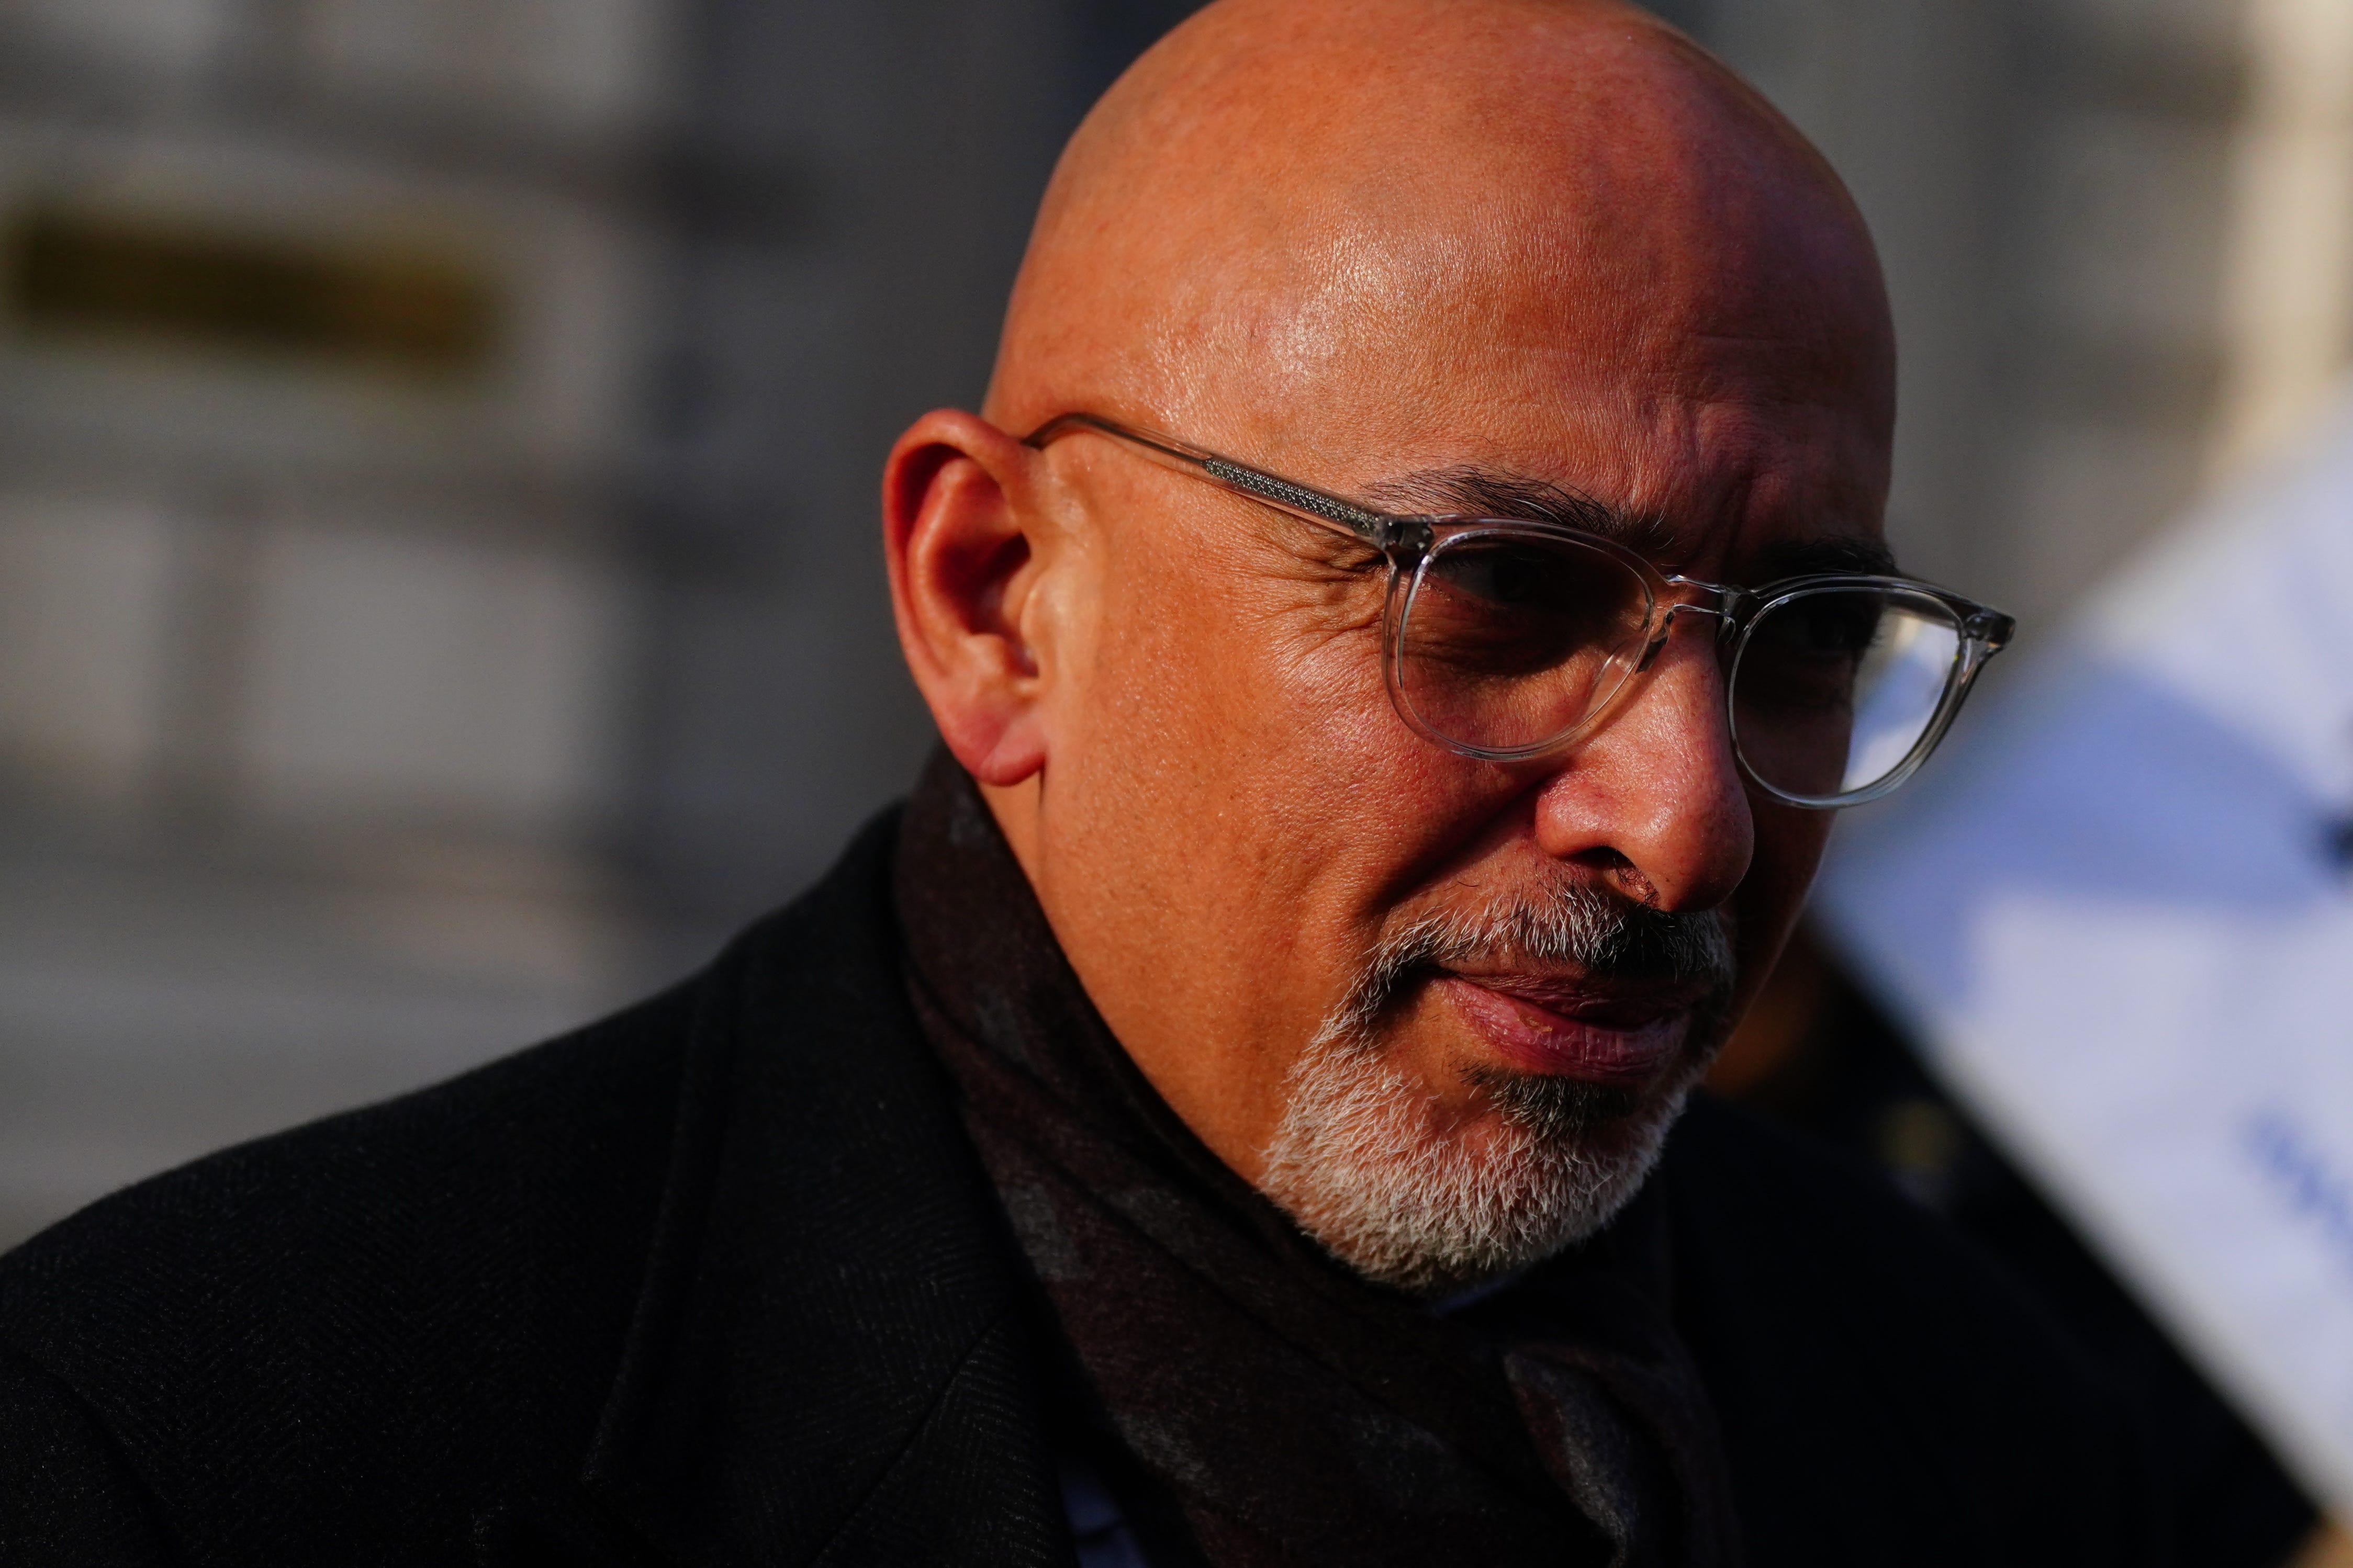 Labour has written to HMRC over Nadhim Zahawi’s tax affairs, arguing that the ‘public requires answers’ amid allegations he paid millions to settle a dispute over his tax